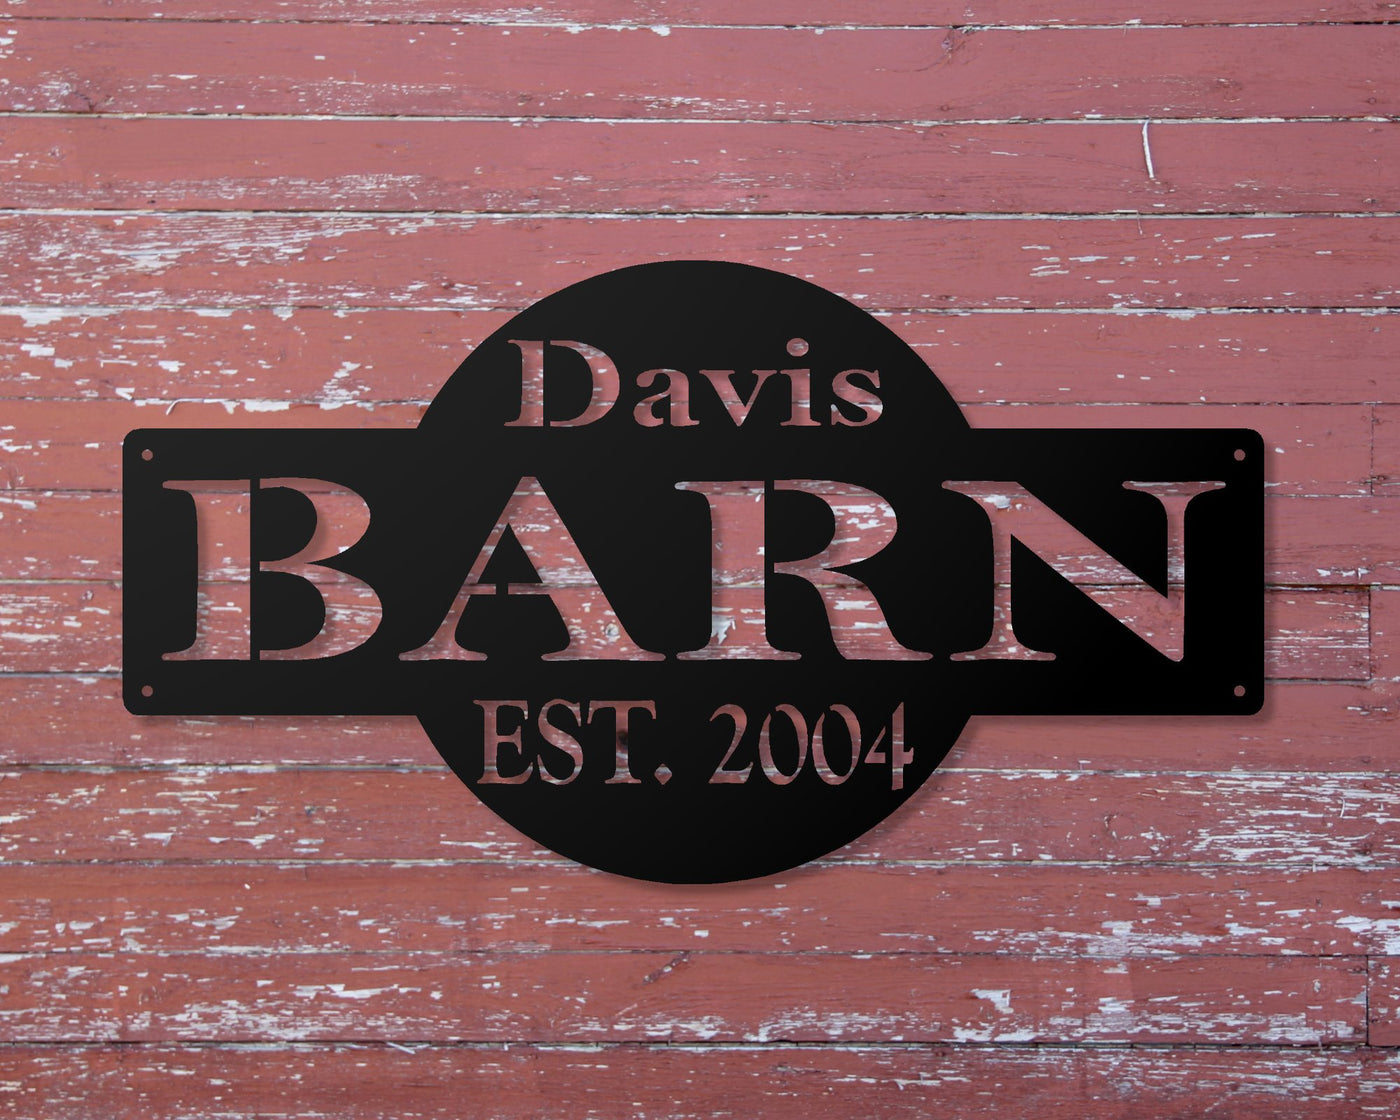 Personalized Barn Metal Sign with Name and EST. Date - Madison Iron and Wood - Personalized sign - metal outdoor decor - Steel deocrations - american made products - veteran owned business products - fencing decorations - fencing supplies - custom wall decorations - personalized wall signs - steel - decorative post caps - steel post caps - metal post caps - brackets - structural brackets - home improvement - easter - easter decorations - easter gift - easter yard decor